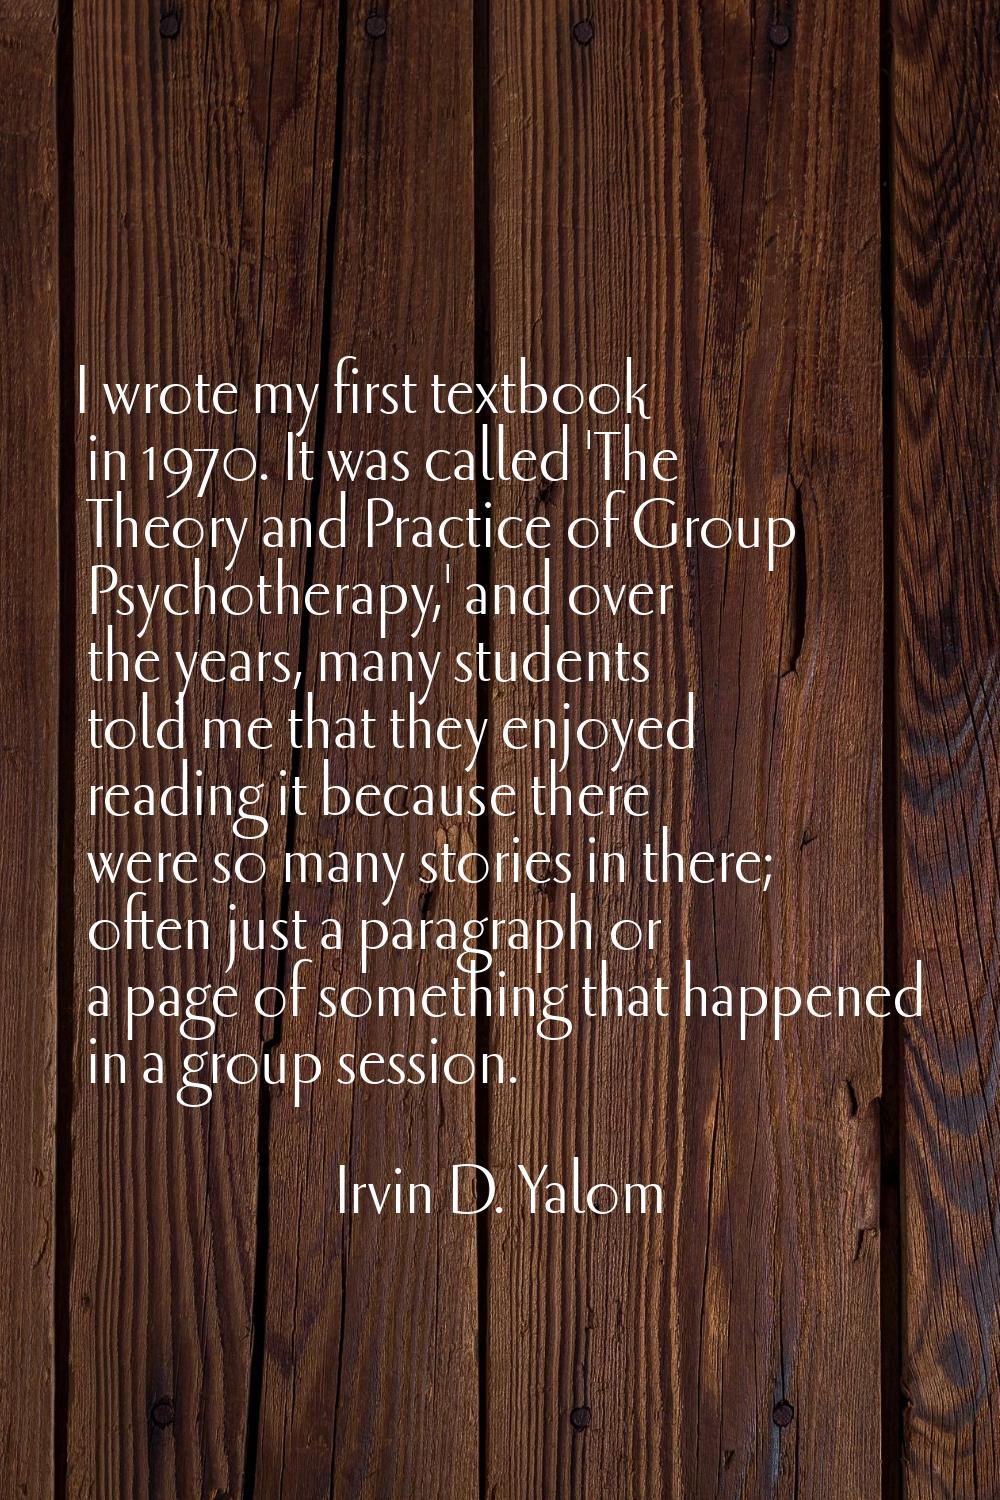 I wrote my first textbook in 1970. It was called 'The Theory and Practice of Group Psychotherapy,' 